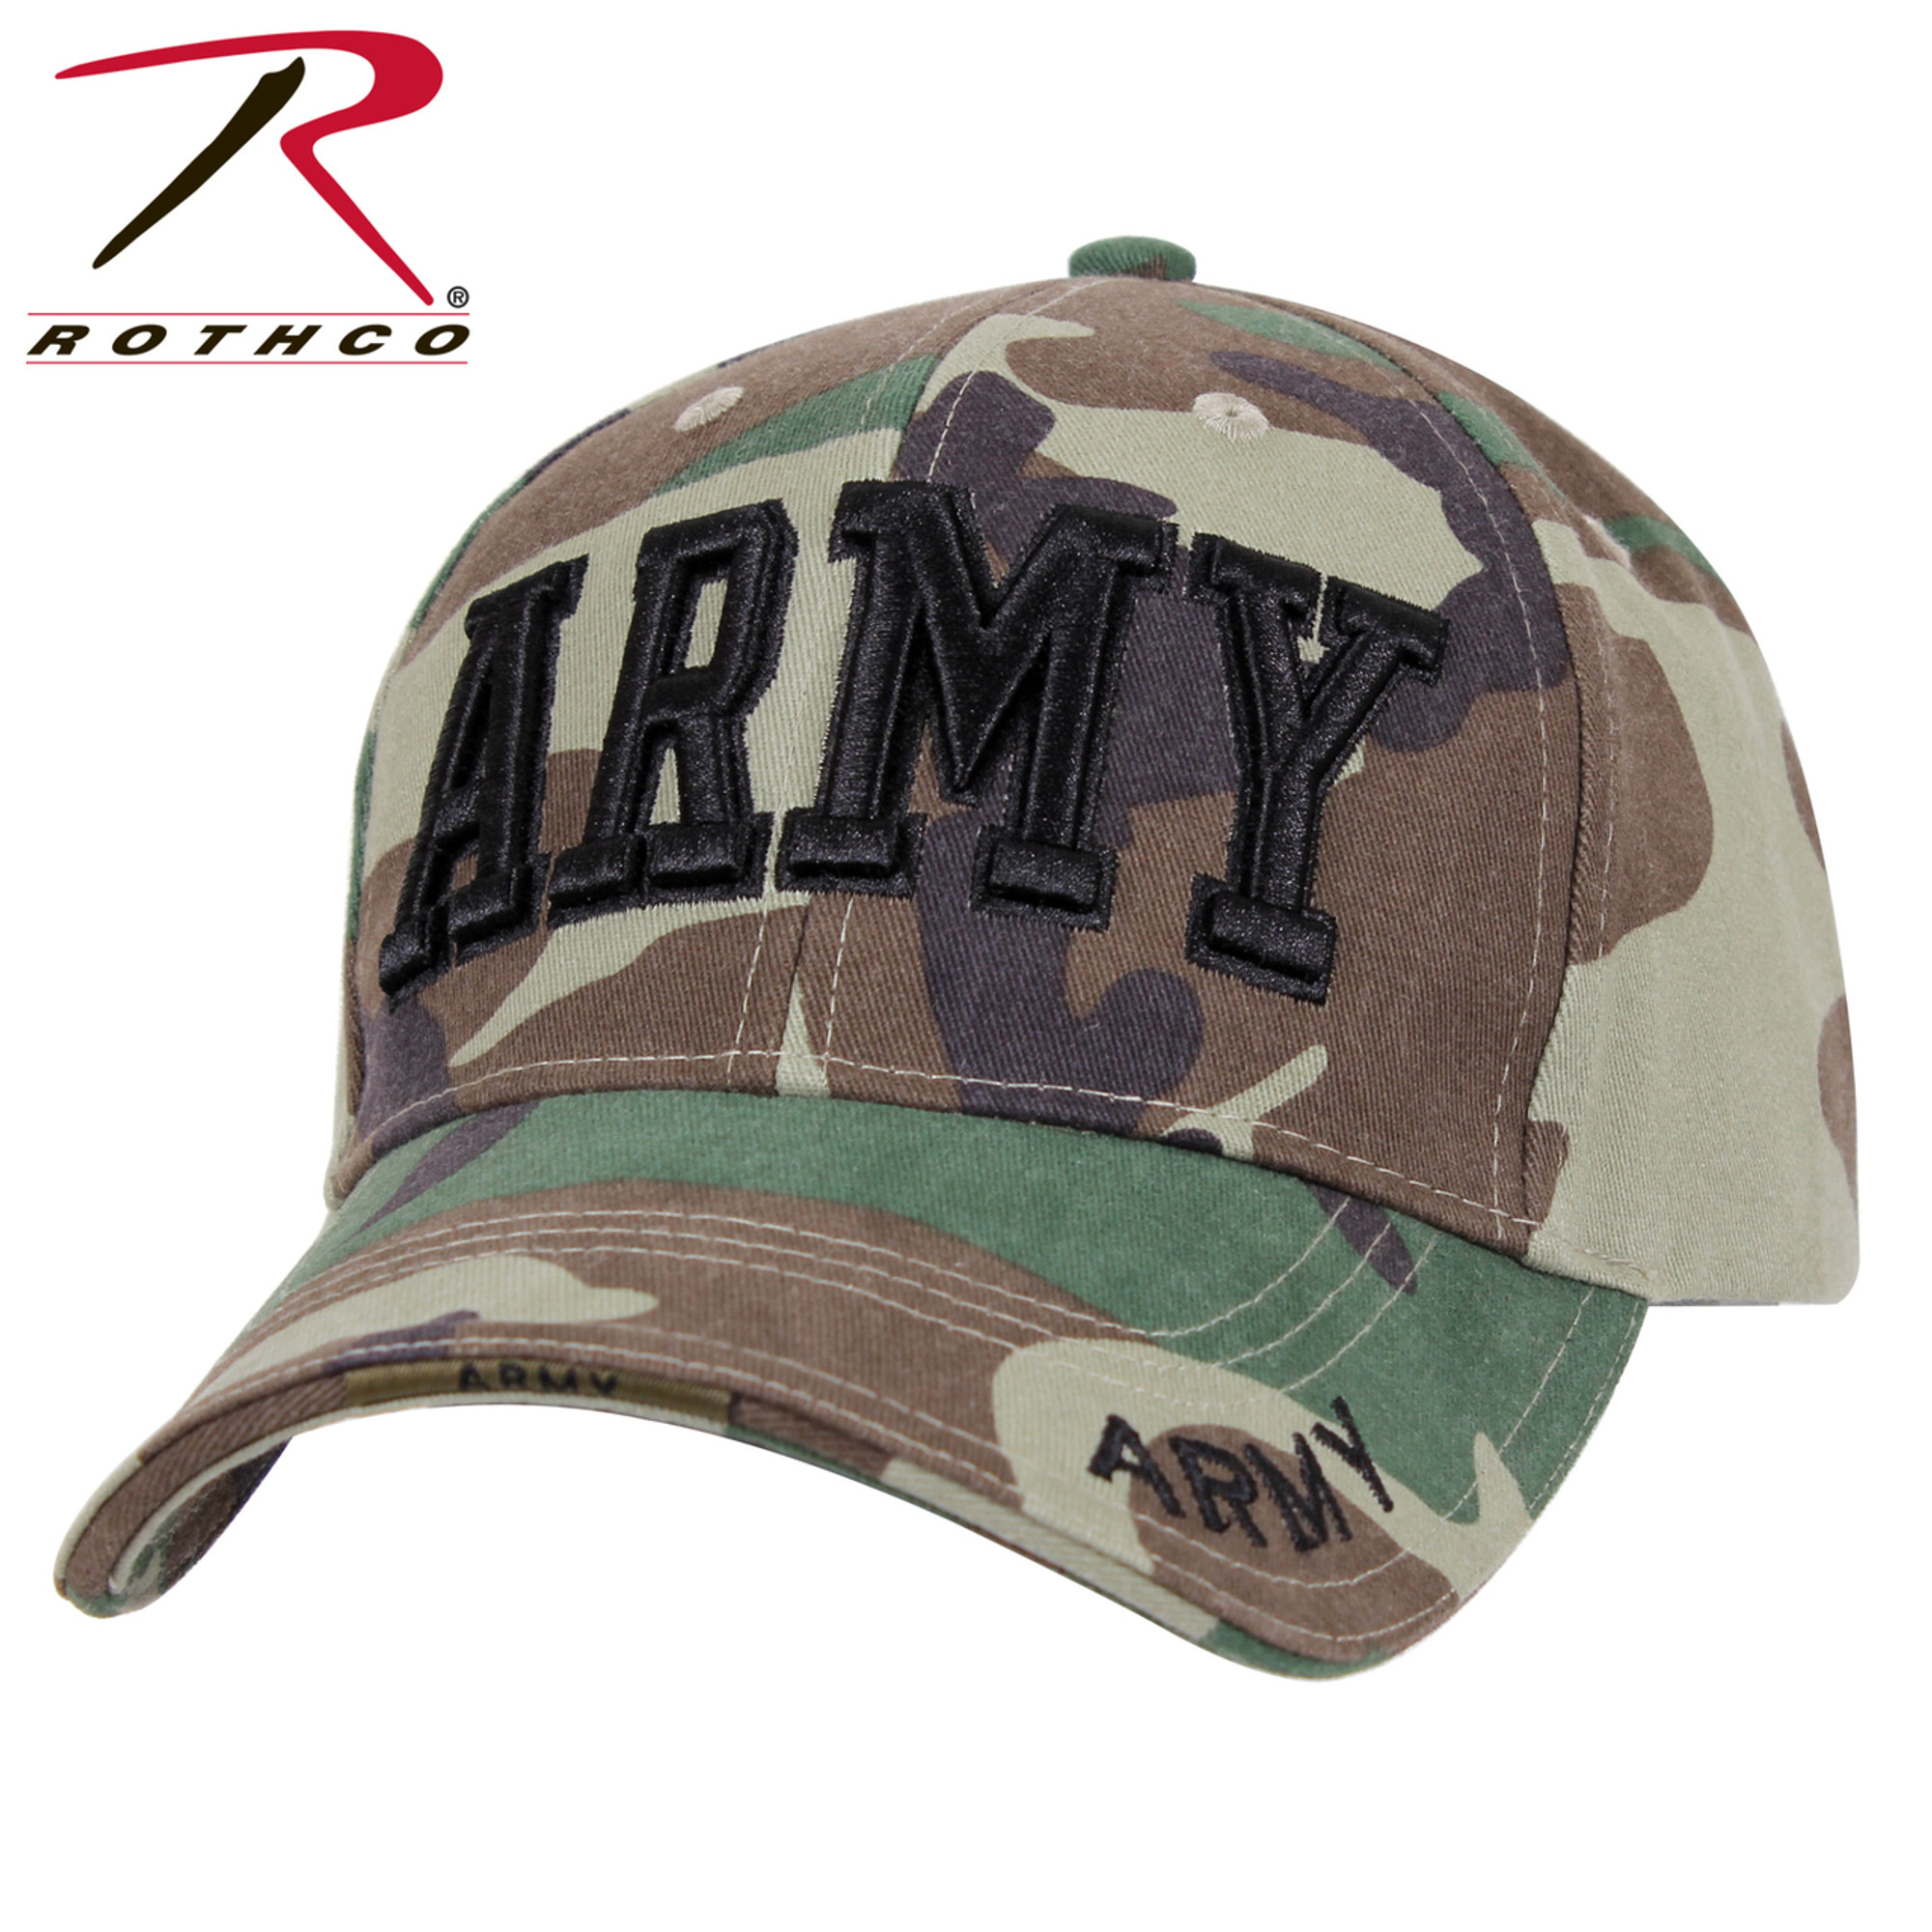 Rothco Deluxe Army Embroidered Low Profile Insignia Cap - Woodland Camo